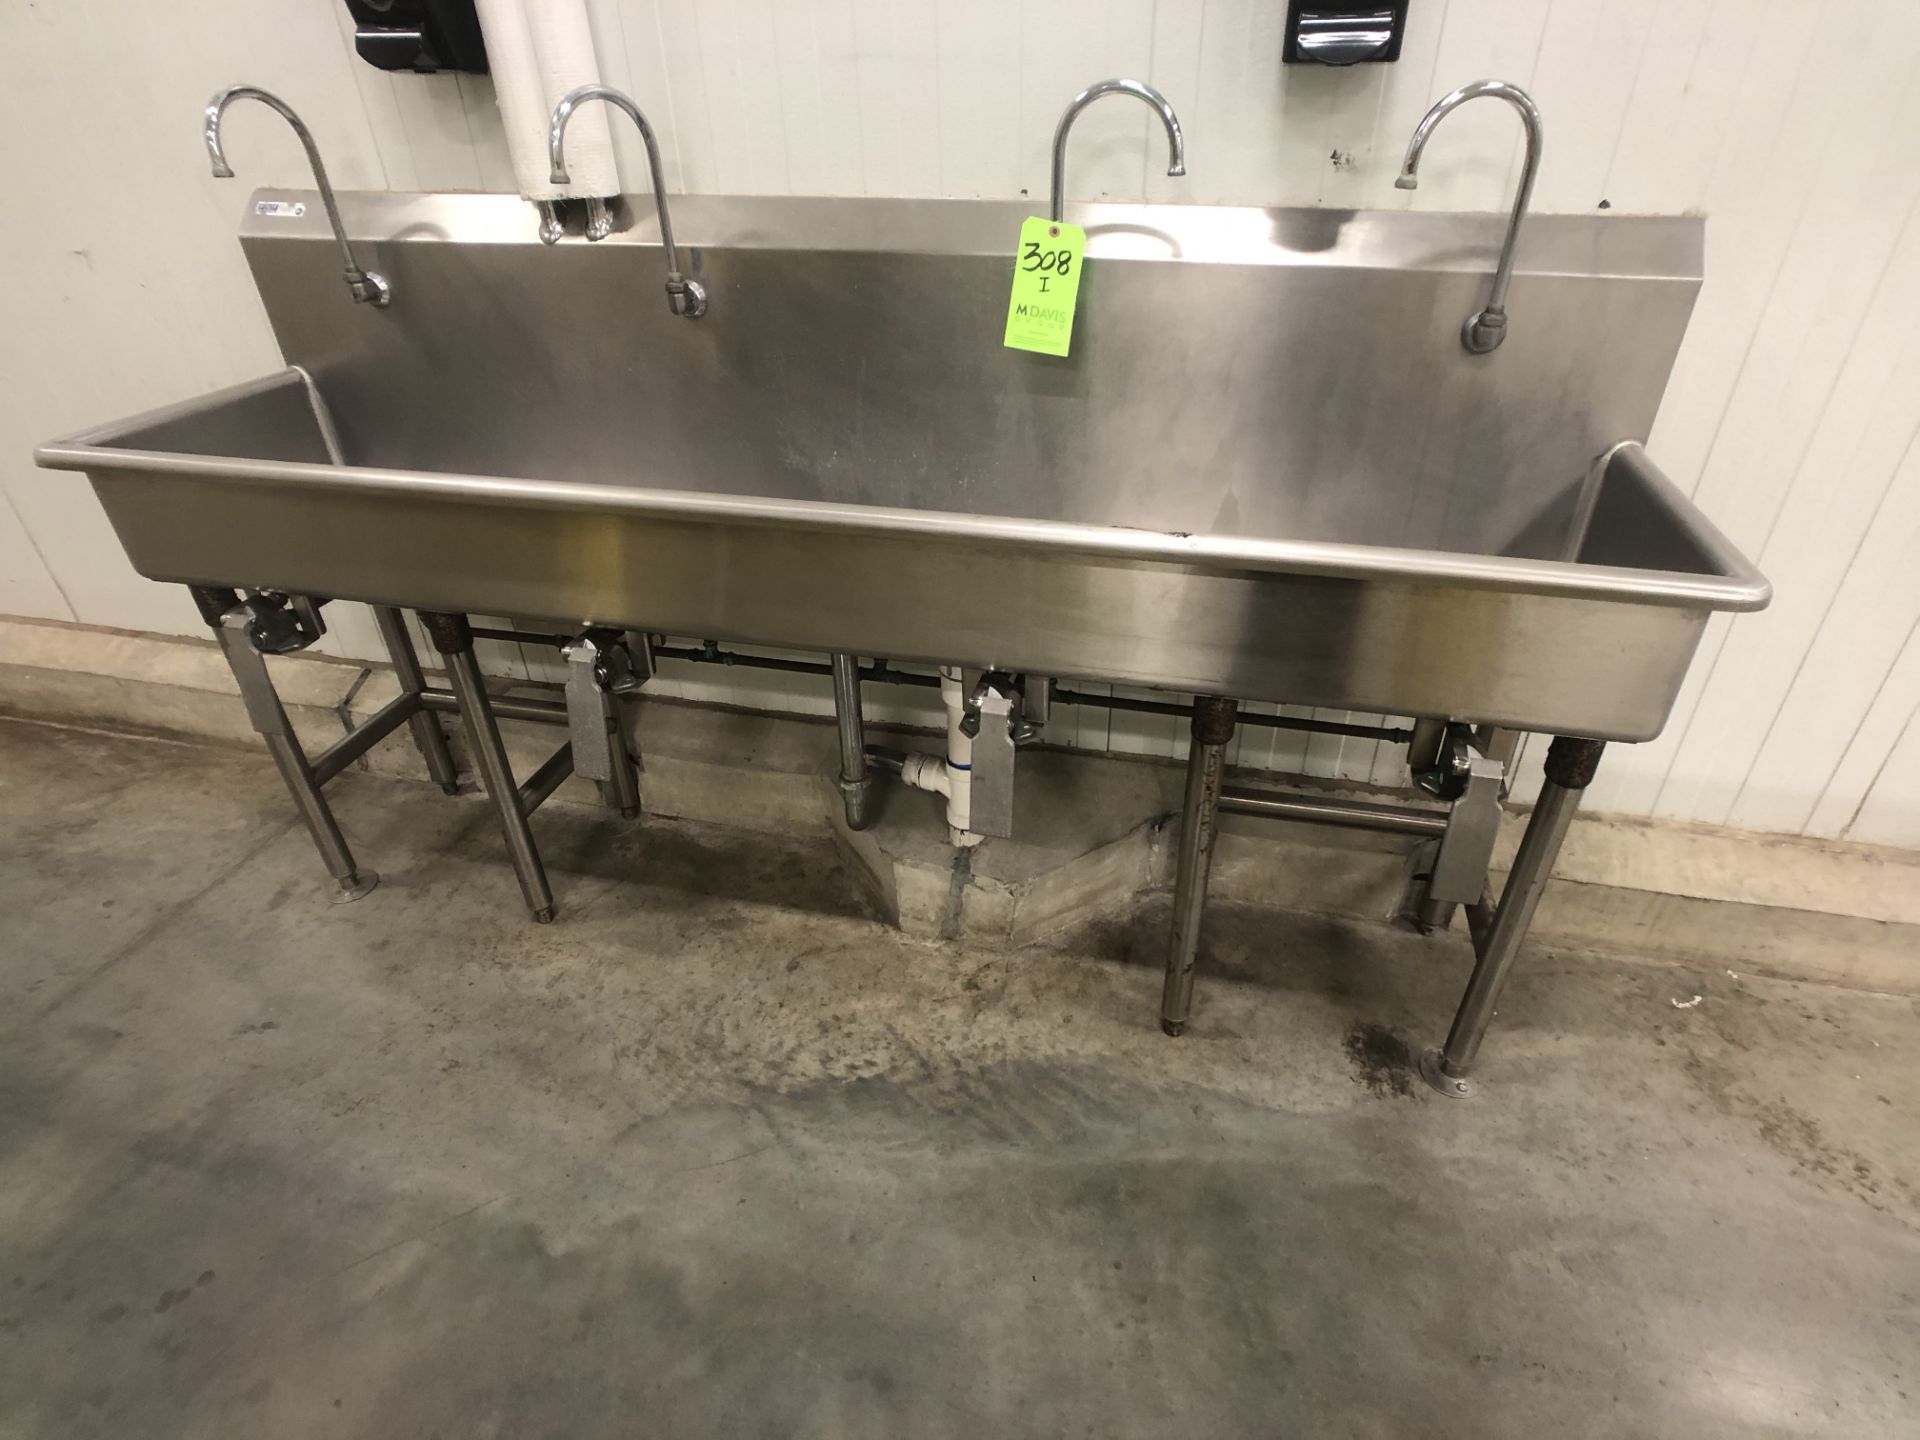 S/S SINK W/ FOUR FAUCETS AND KNEE PEDDLES